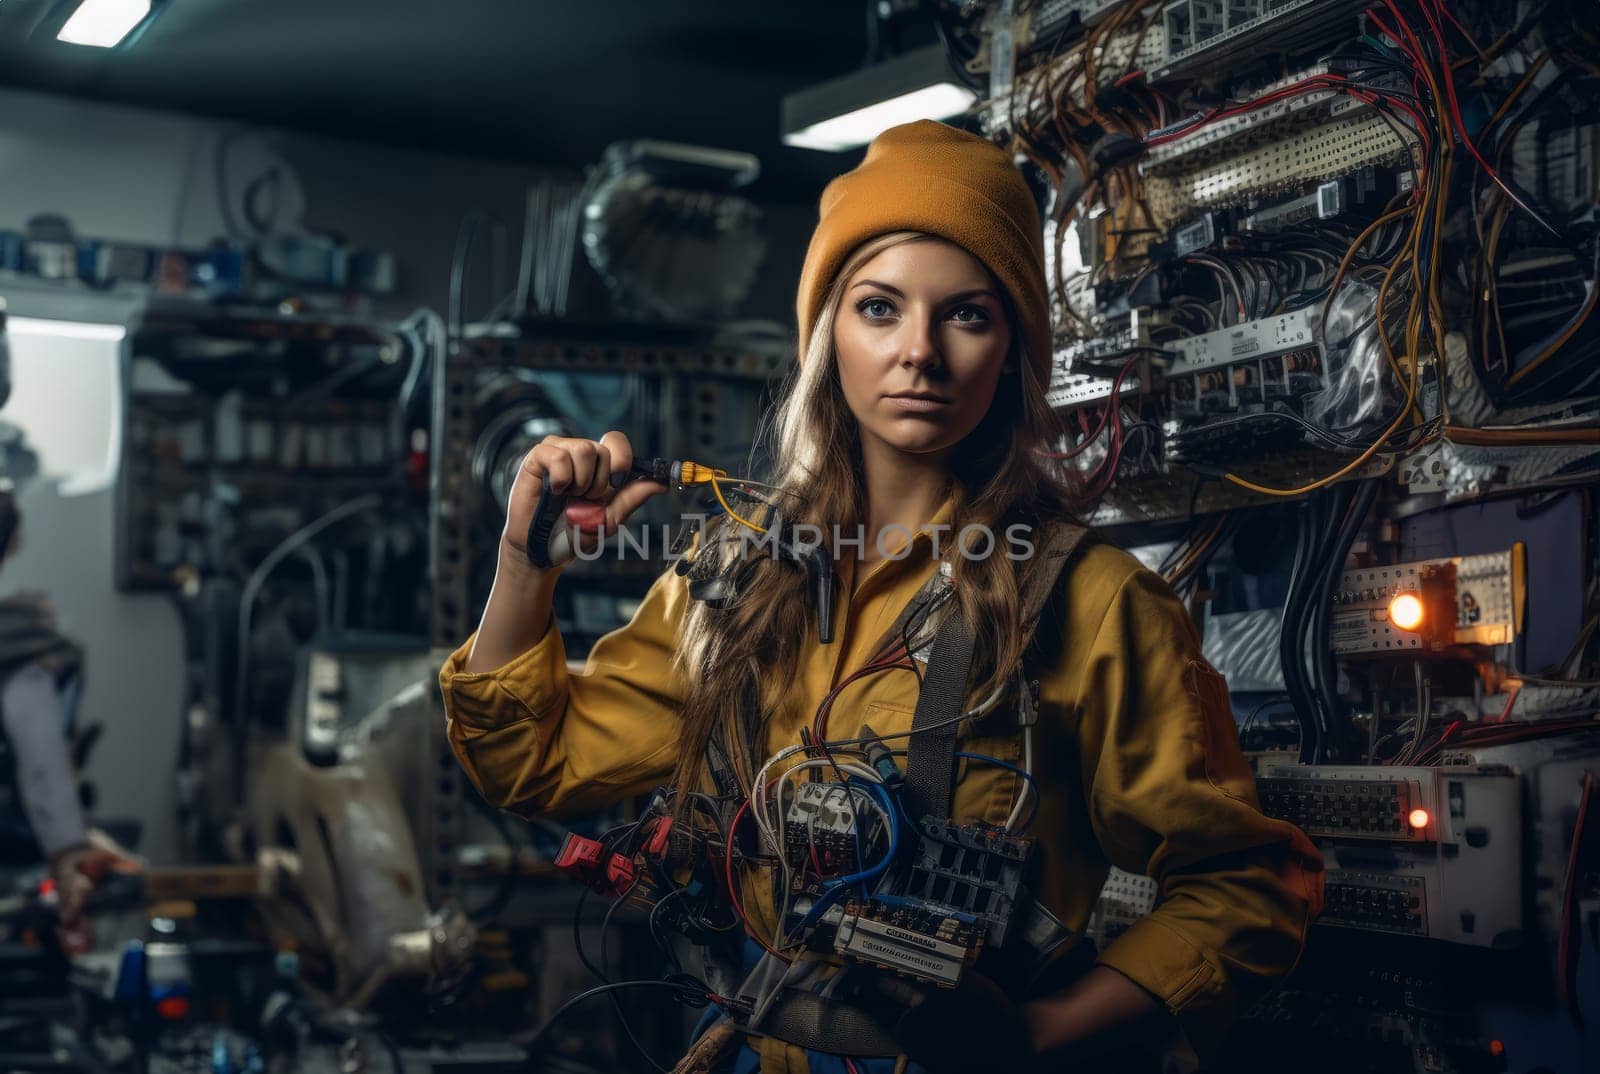 scene of technical expertise, a woman adeptly navigates an electronics service environment, surrounded by modern computers and cables, showcasing her skillful repair and maintenance abilities